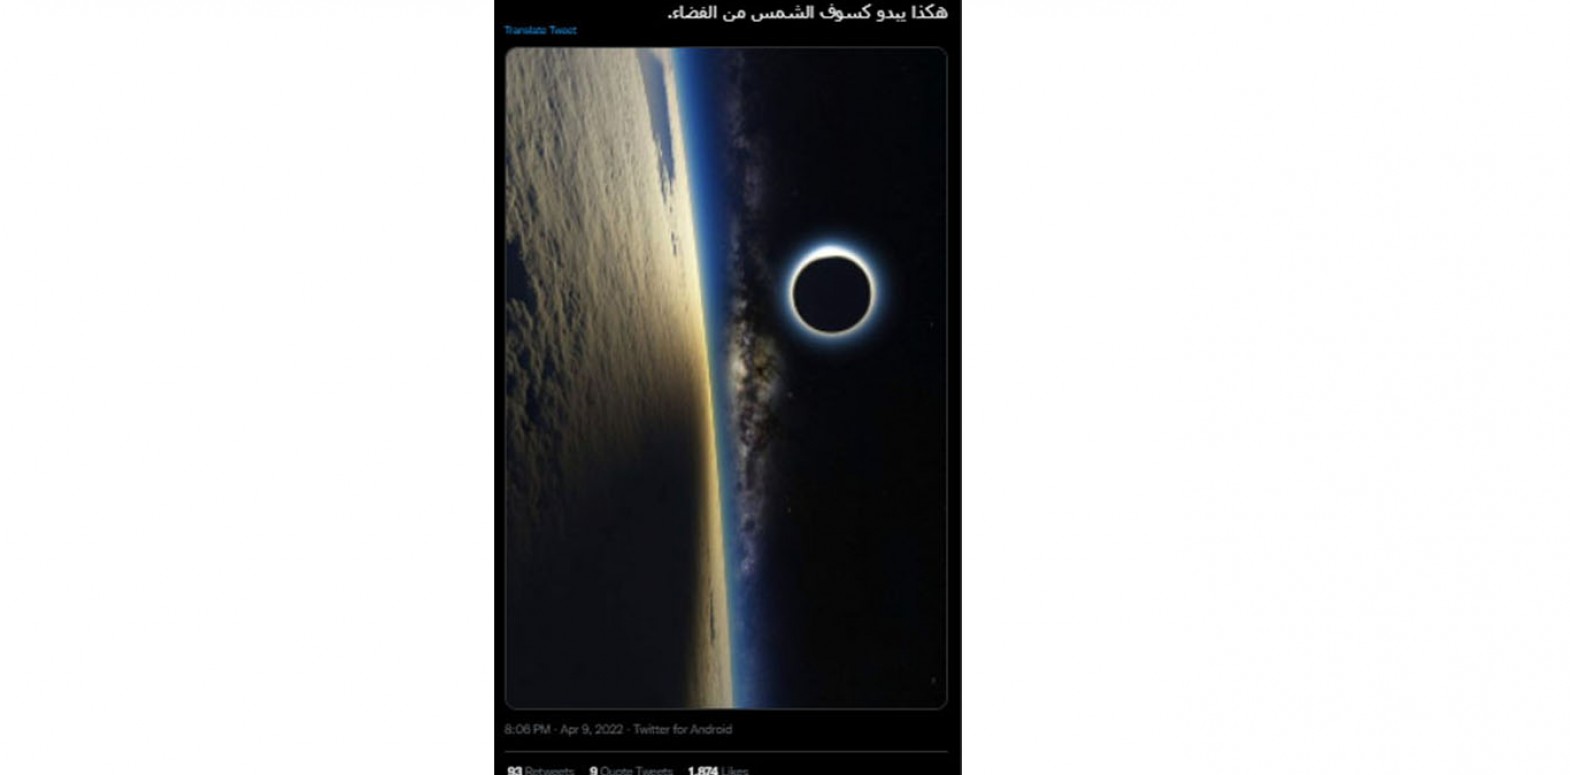 This image is imaginary and does not show the solar eclipse from space